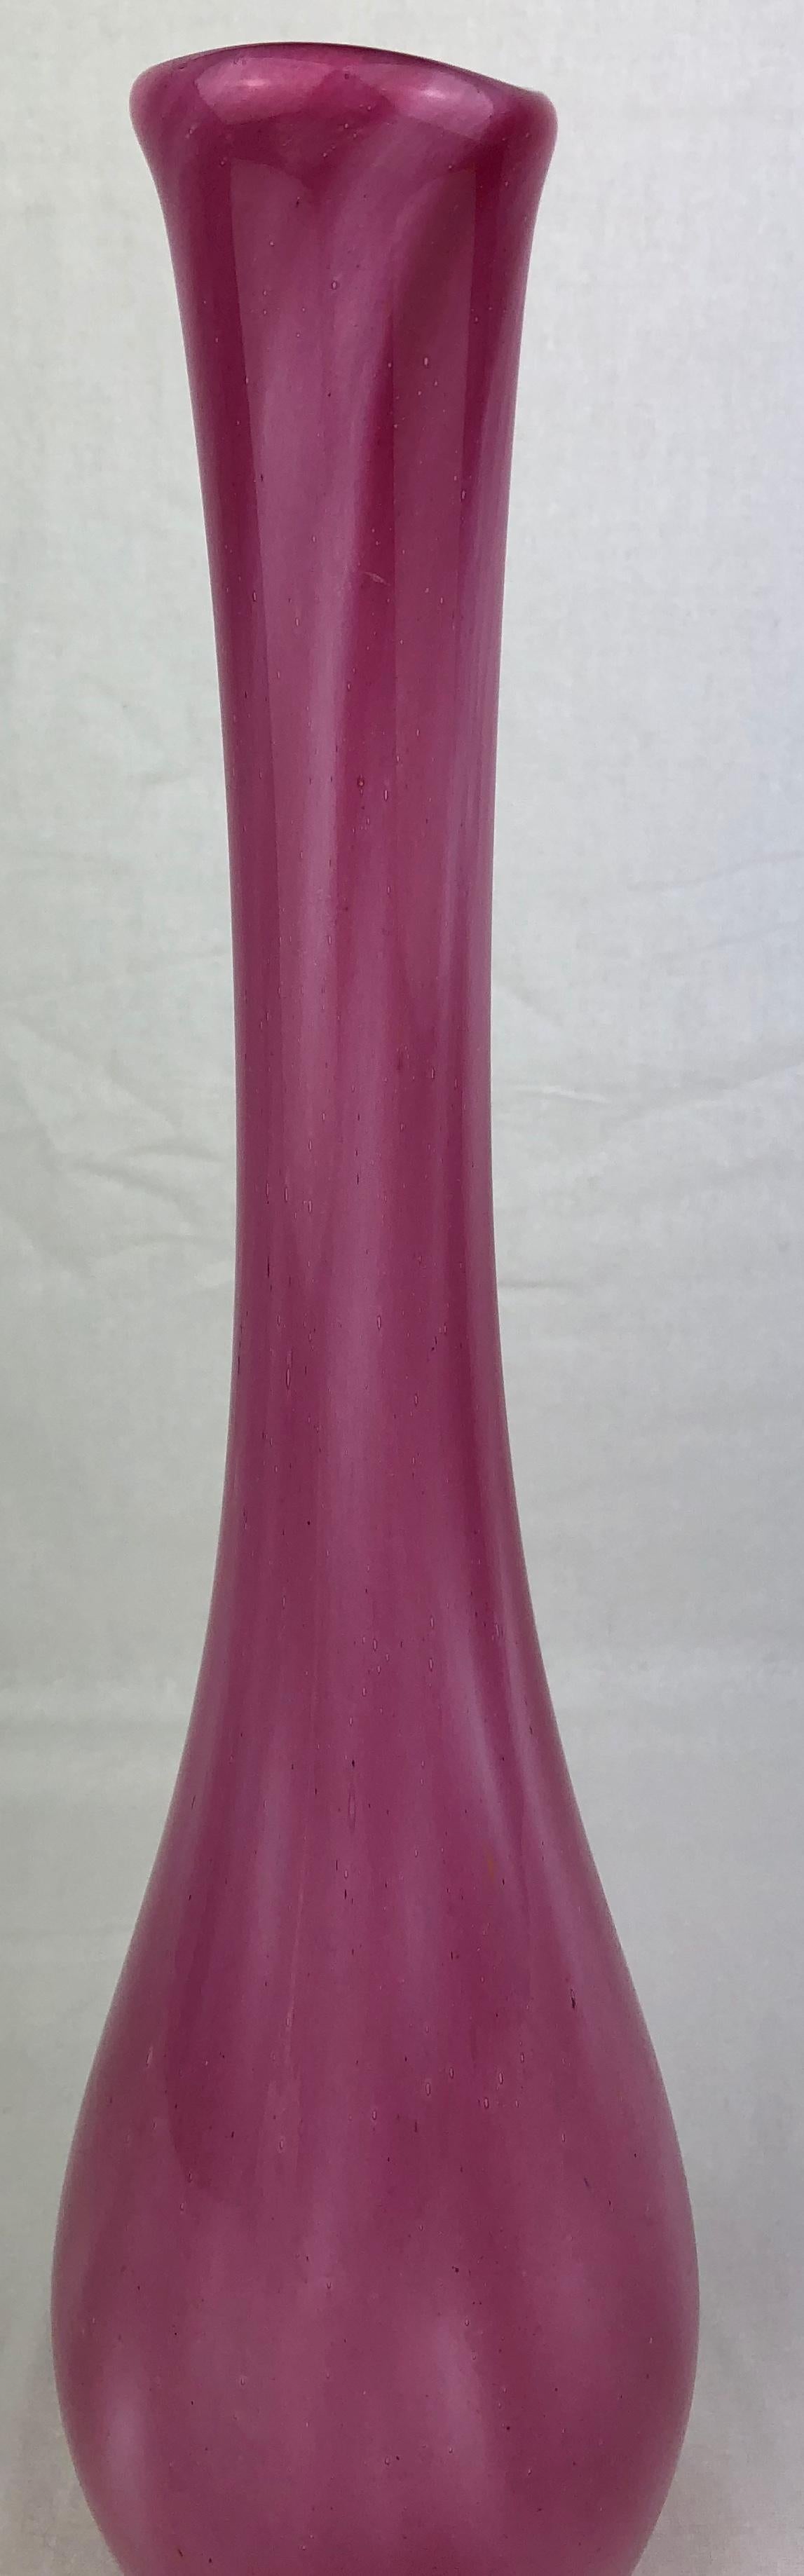 Hand-Crafted French Art Glass Pink Stem Flower Vase Signed Pierre Nicolle For Sale